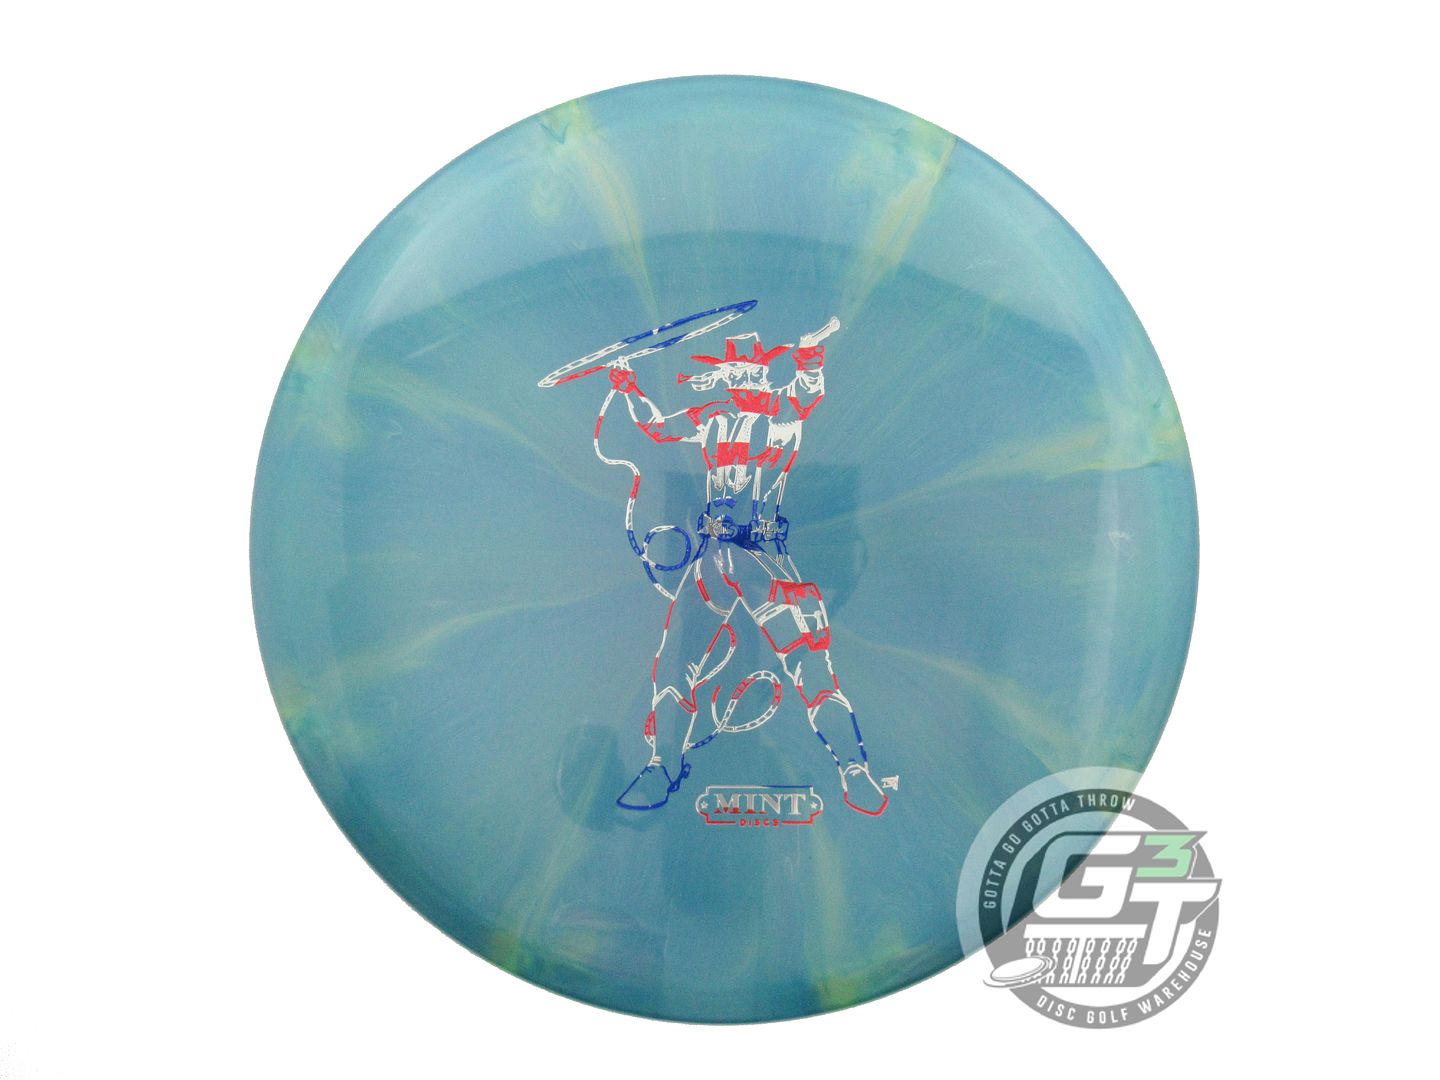 Mint Discs Limited Edition Super Mint Society Stamp Swirly Sublime Mustang Midrange Golf Disc (Individually Listed)